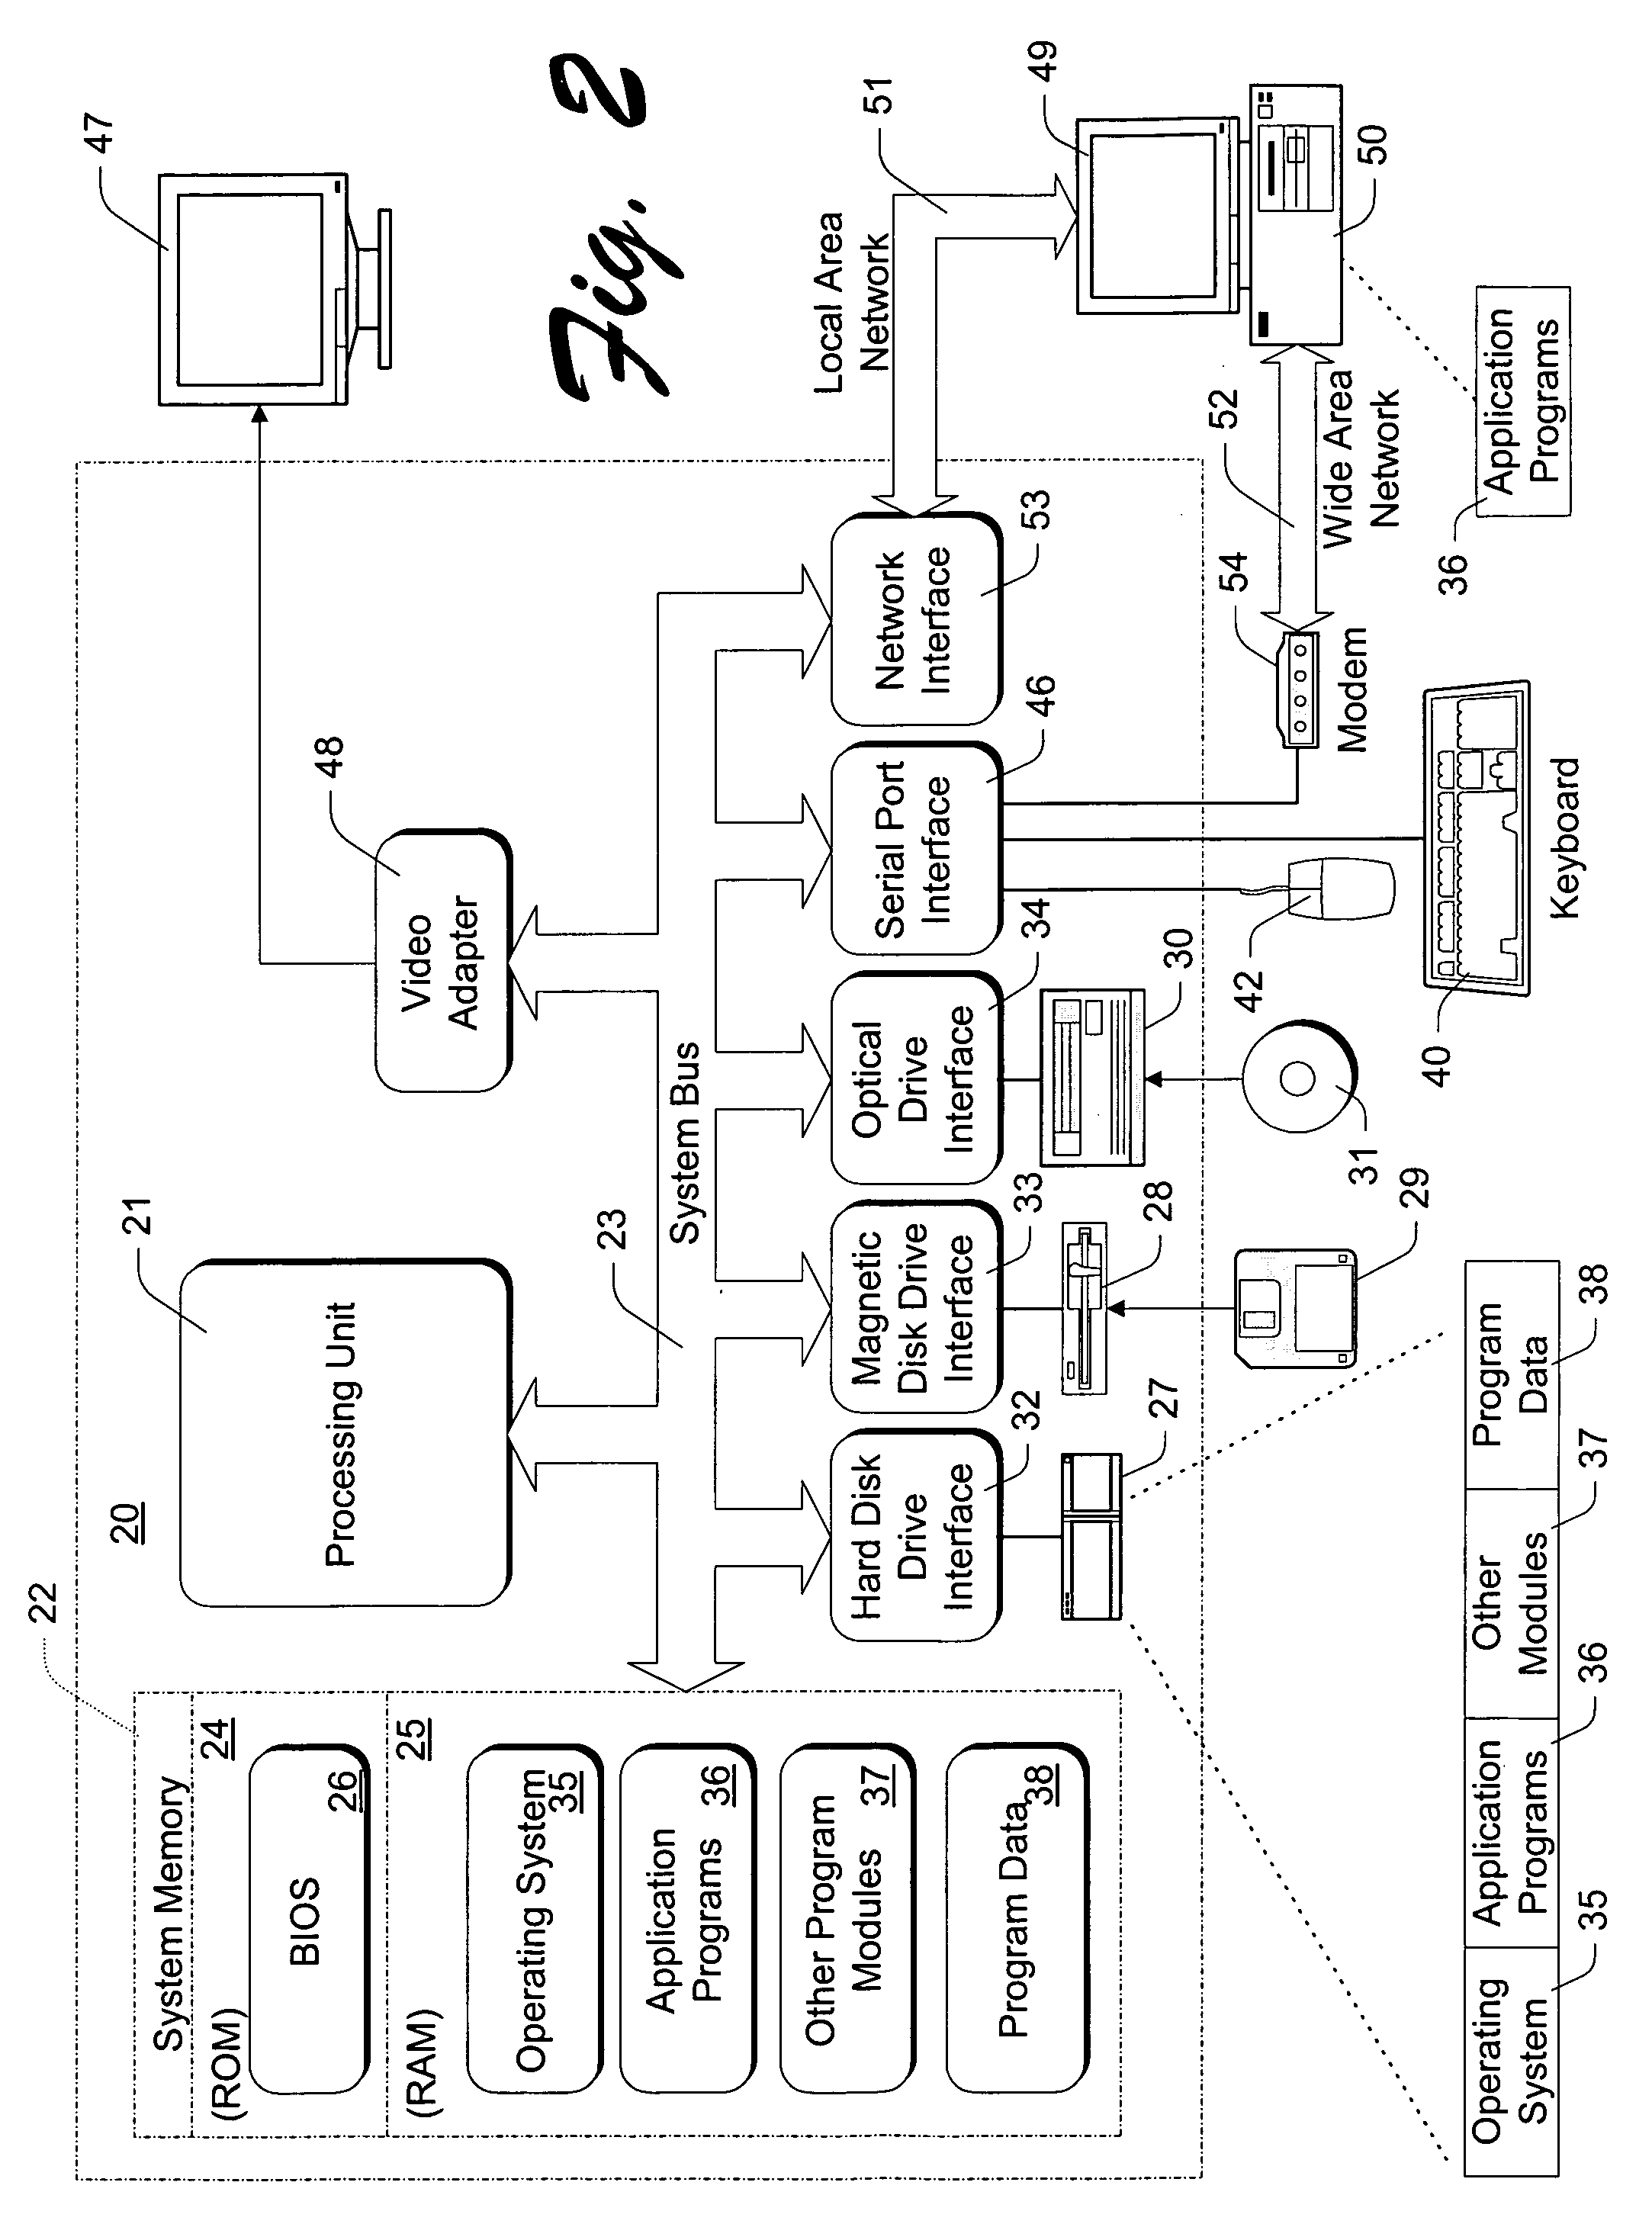 User and content aware object-based data stream transmission methods and arrangements